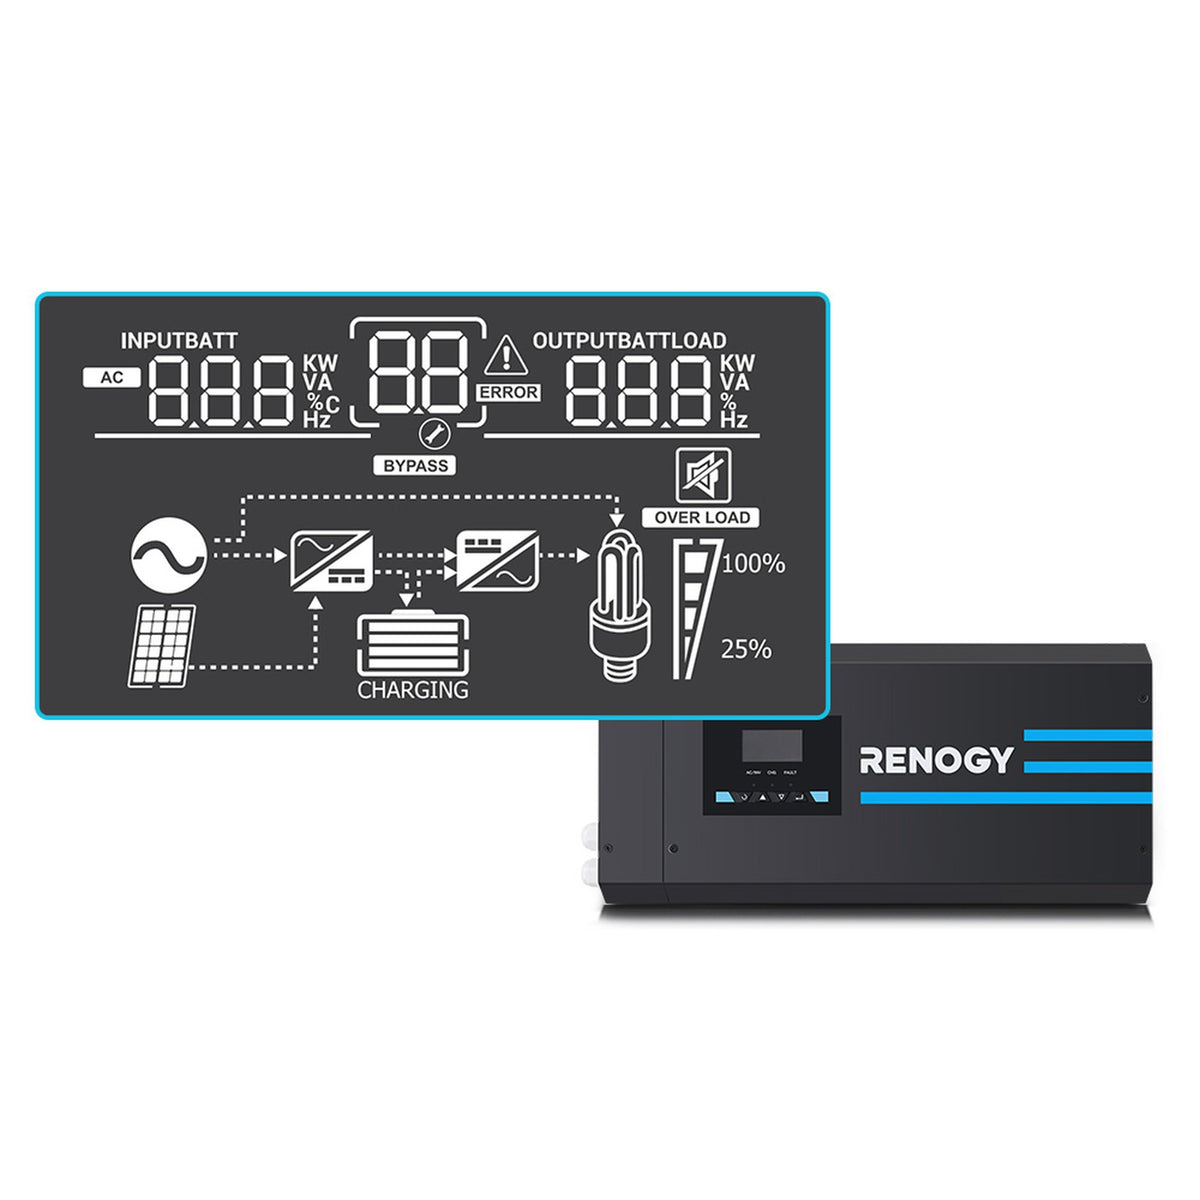 Renogy R-INVT-PCL1-30111S-US 3000W 12V Pure Sine Wave Inverter Charger w/ LCD Display New